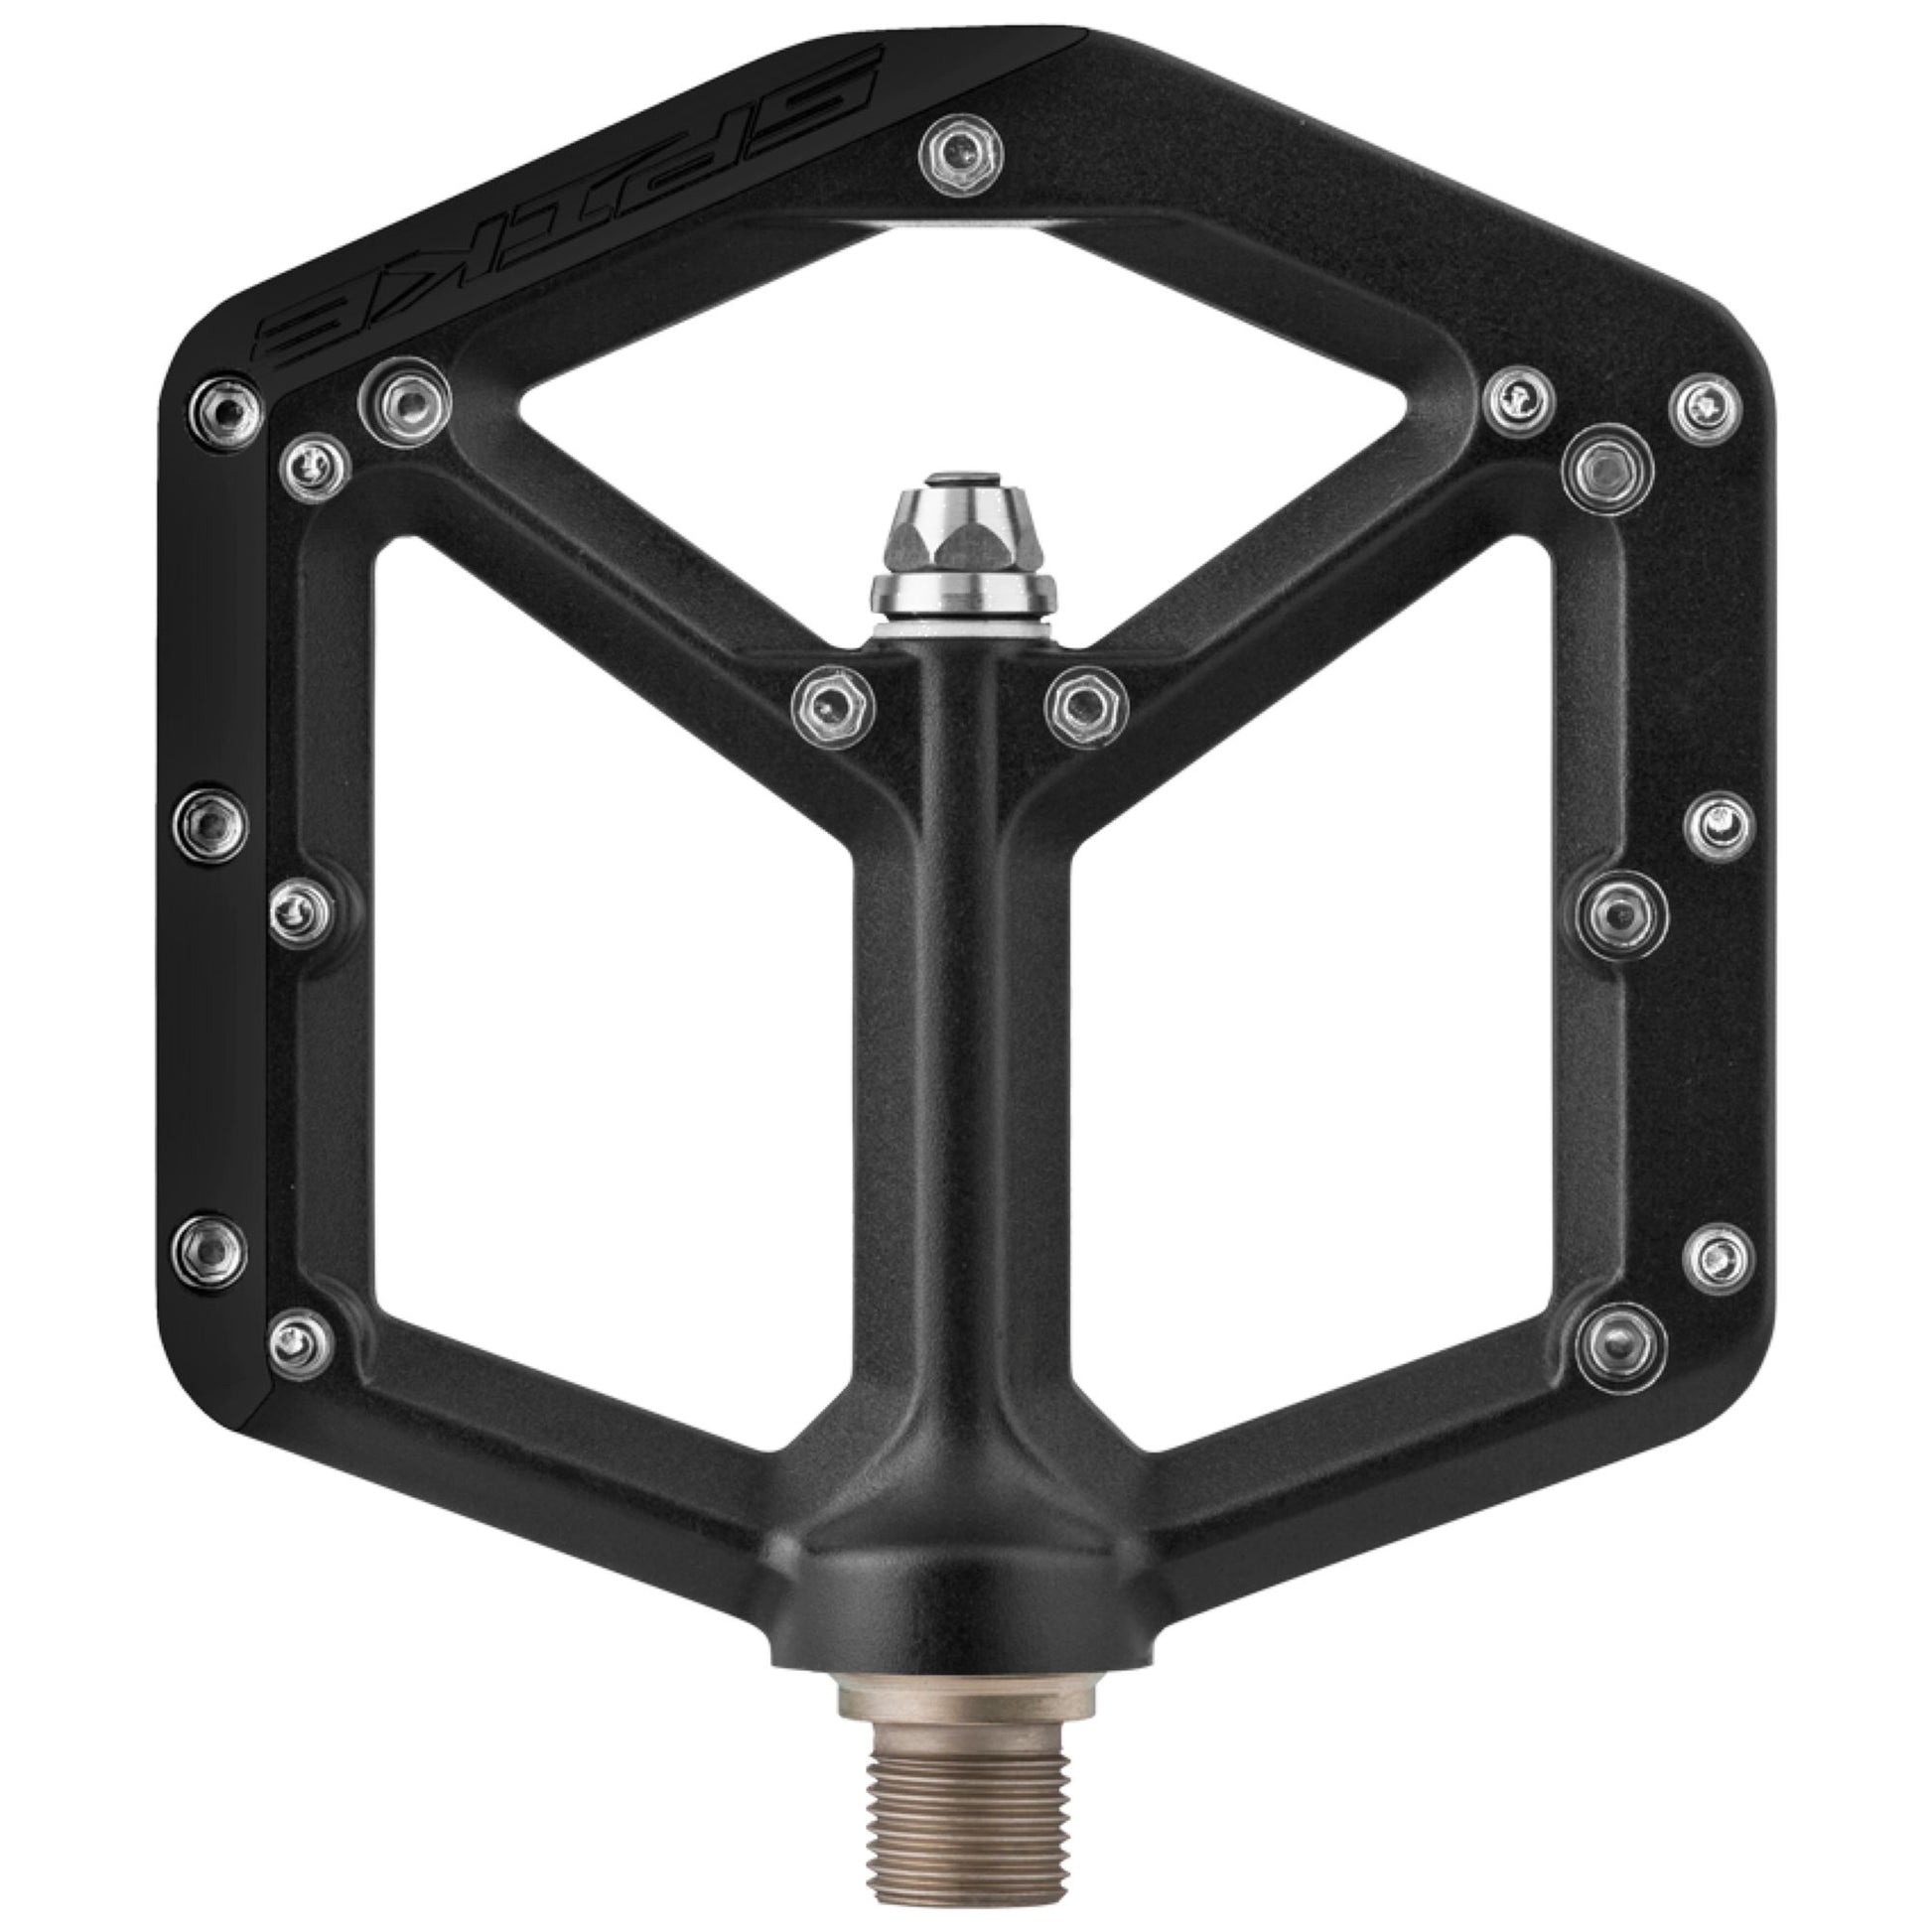 Spank Spike Reboot Pedals Black 100x100mm Pedals